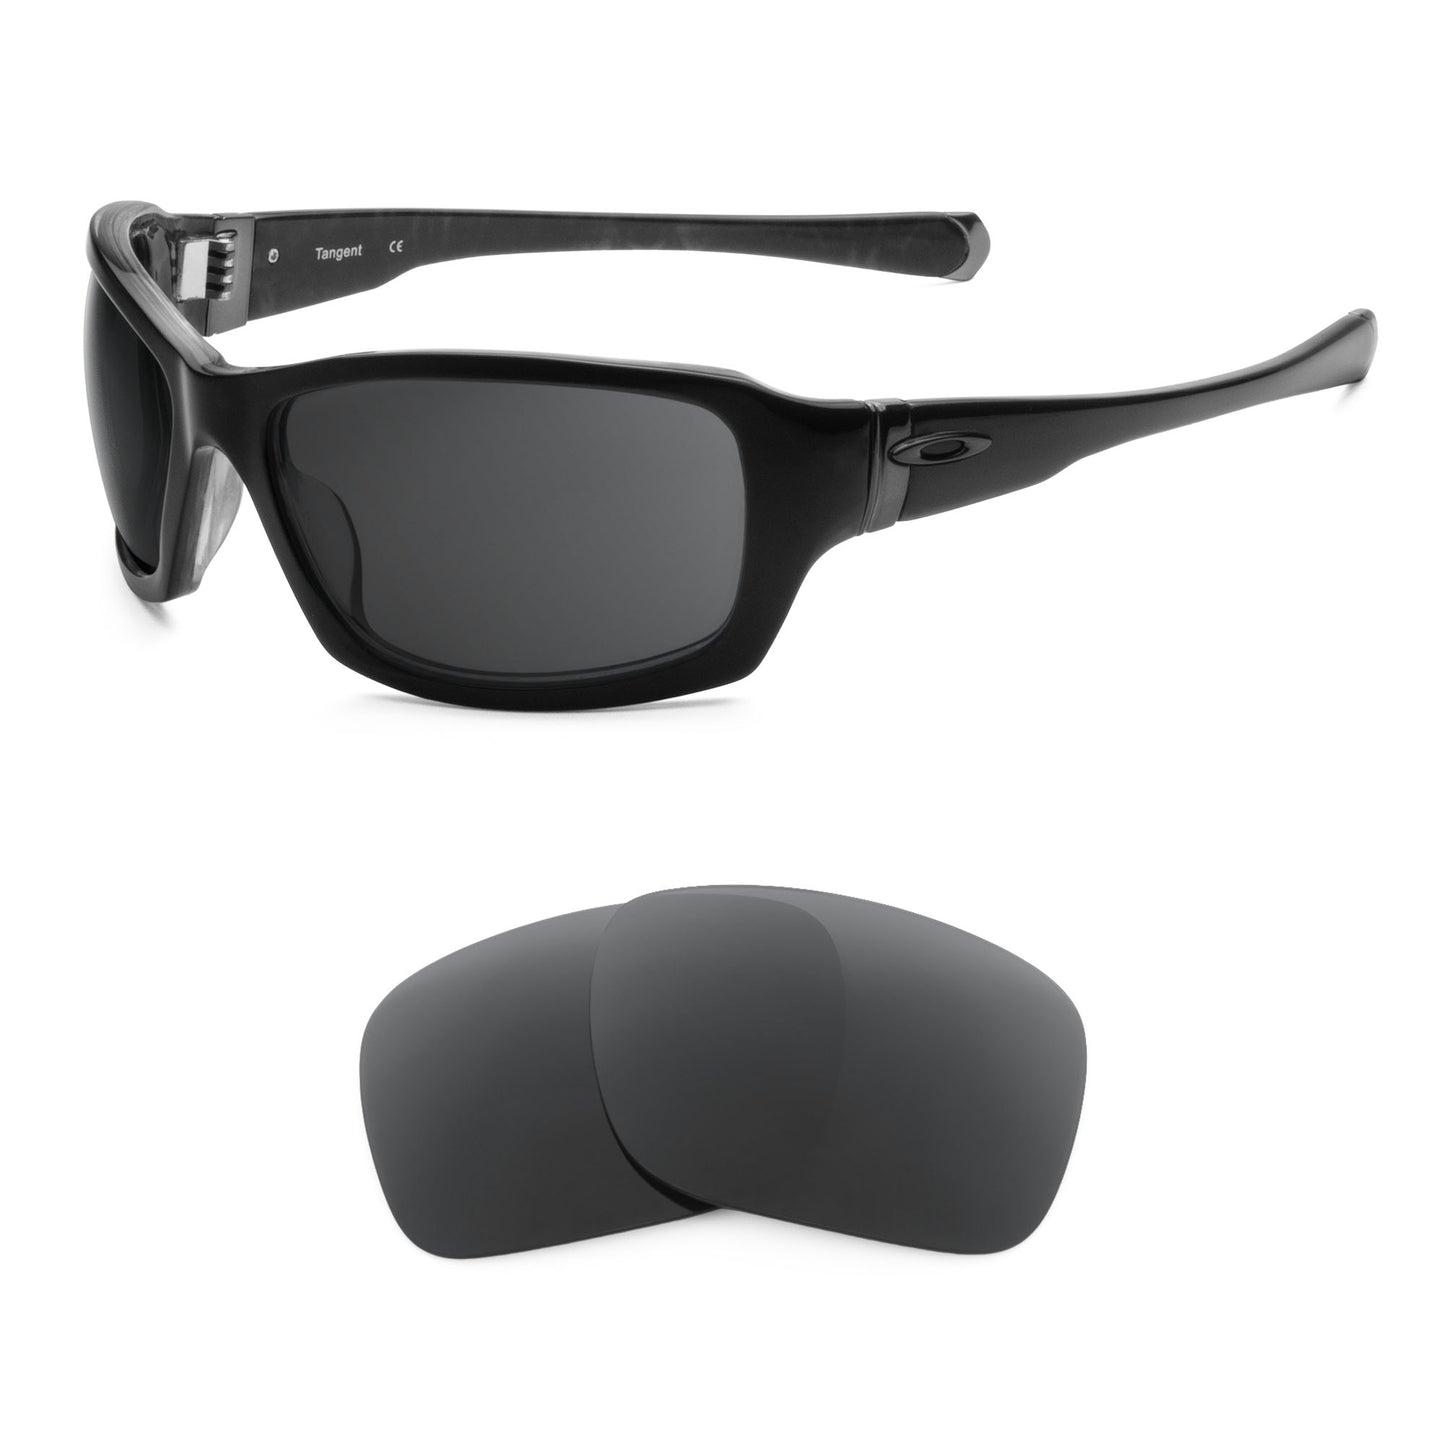 Oakley Tangent sunglasses with replacement lenses